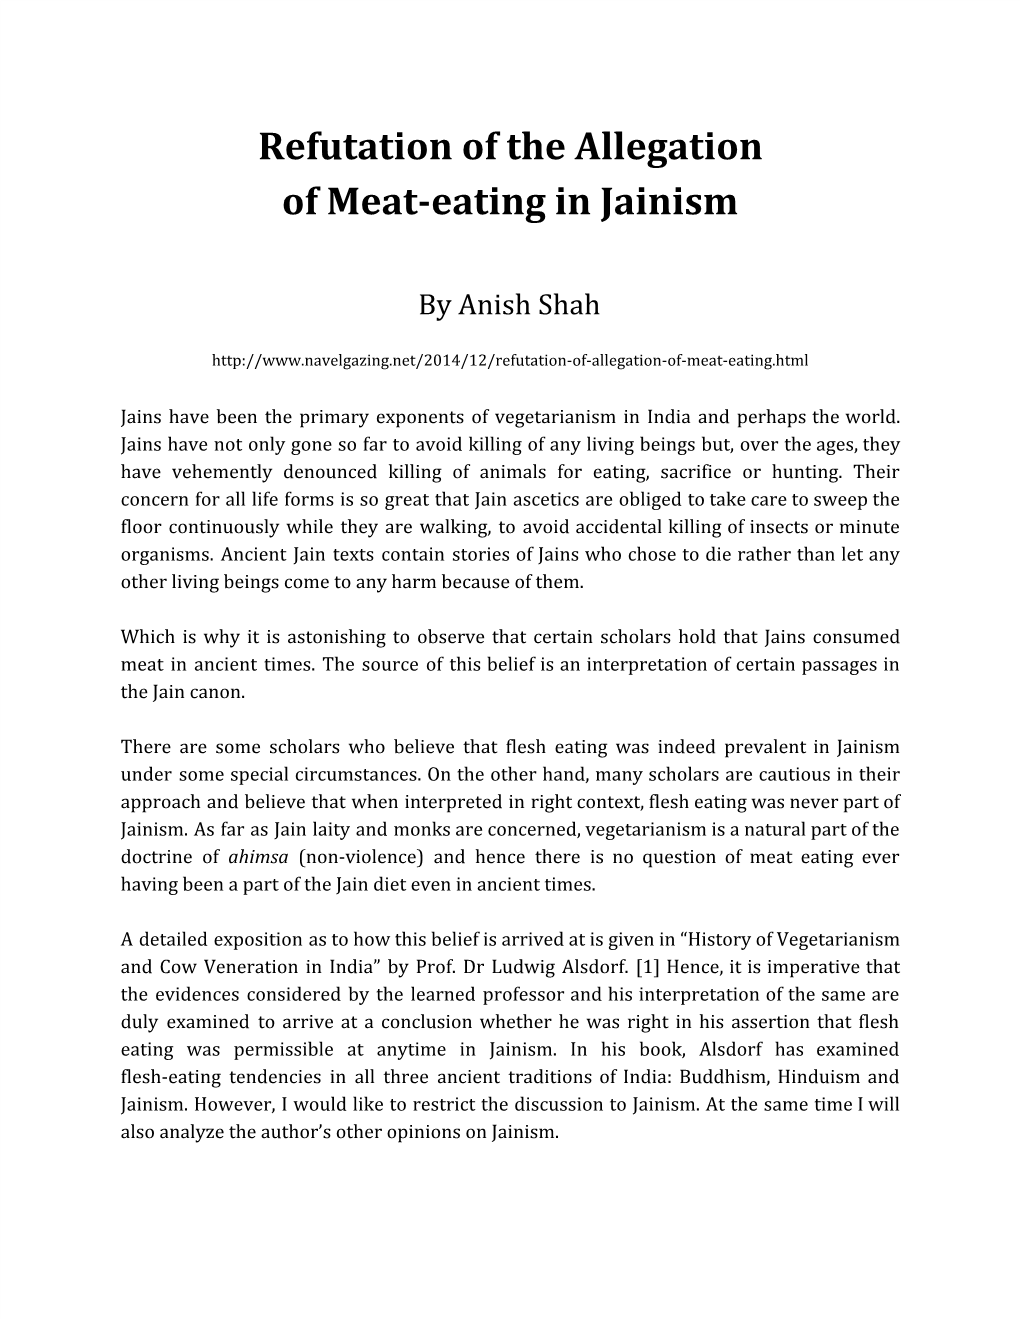 Refutation of the Allegation of Meat-Eating in Jainism